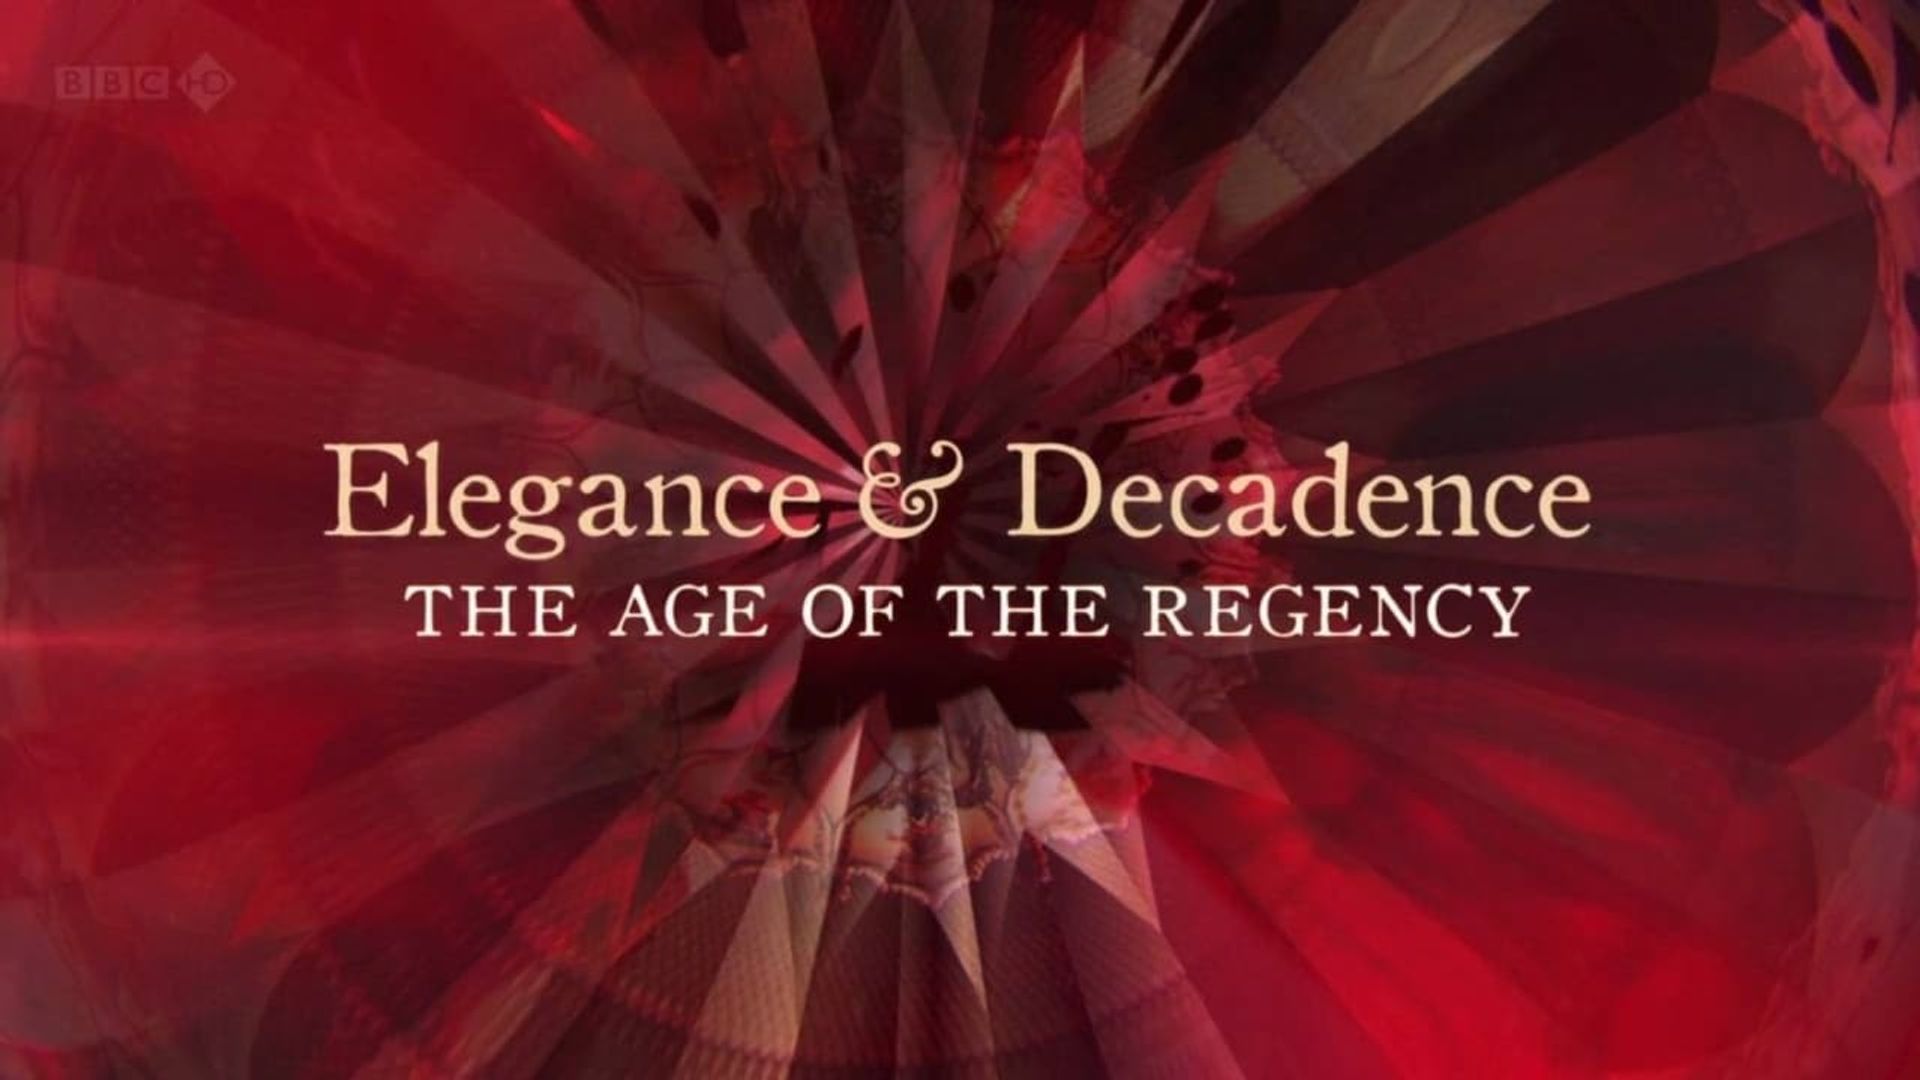 Elegance and Decadence: The Age of the Regency background